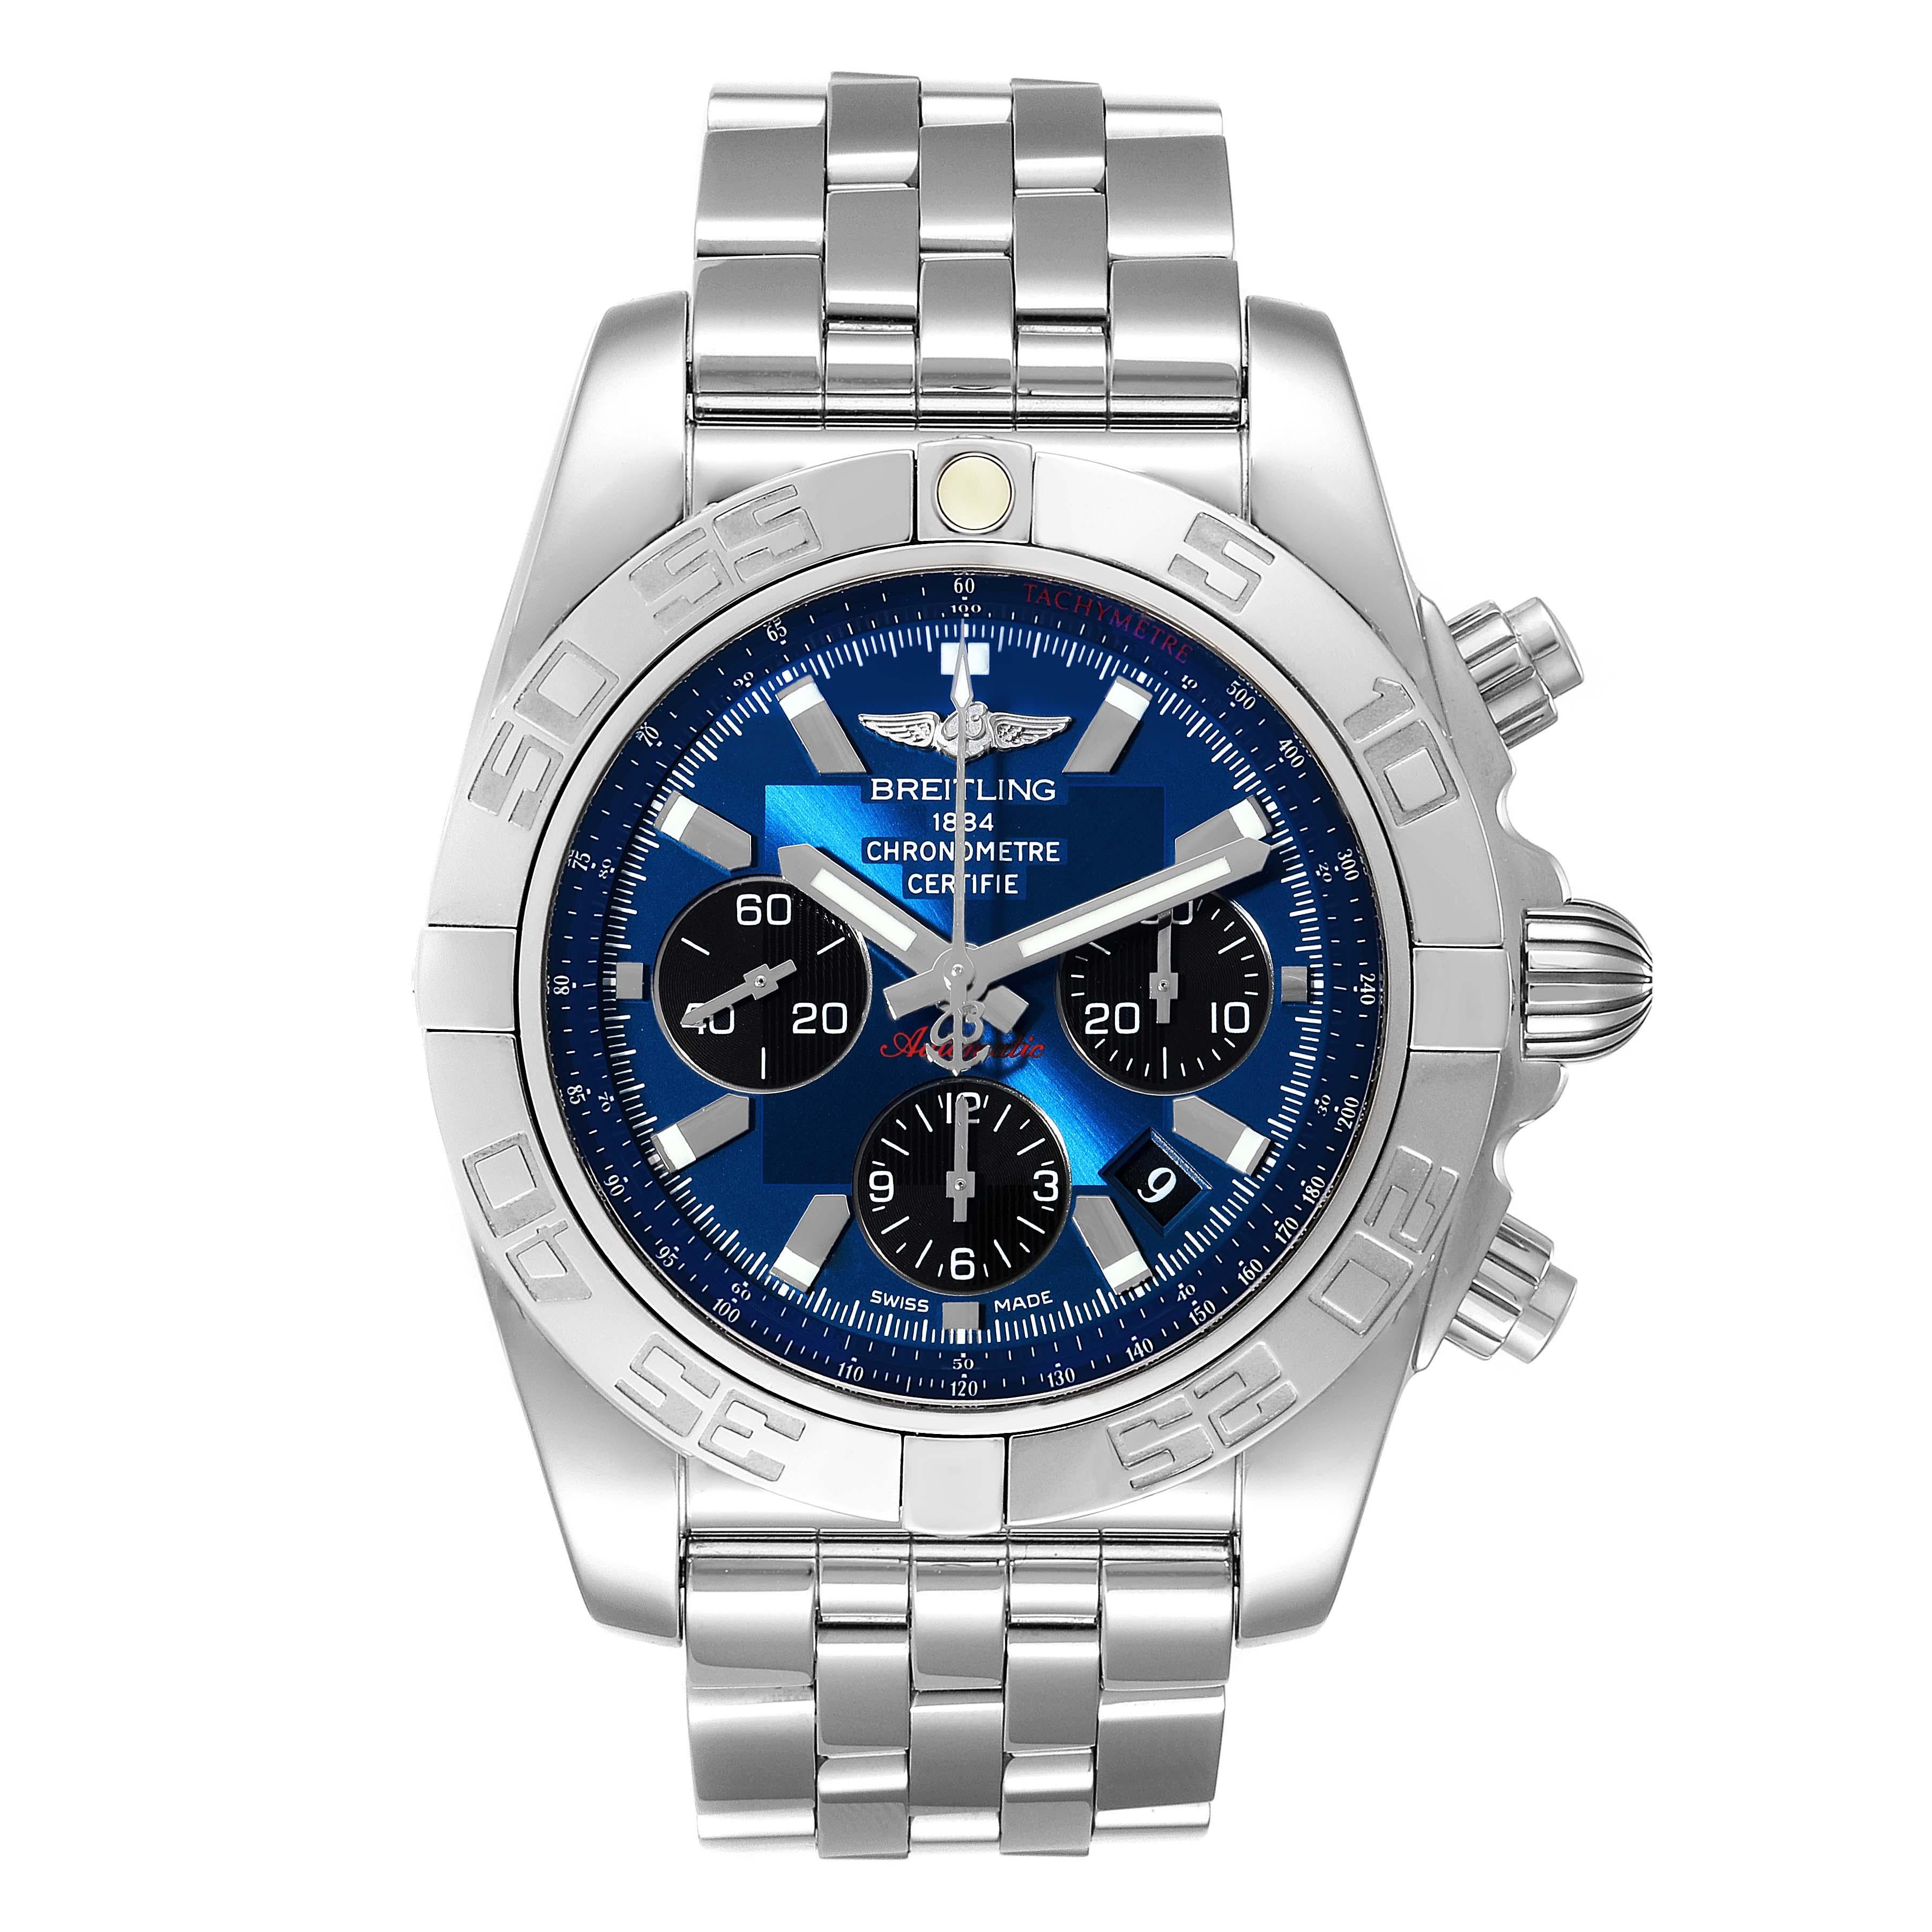 Breitling Chronomat 01 Blue Dial Steel Mens Watch AB0110 Box Papers. Self-winding automatic officially certified chronometer movement. Chronograph function. Stainless steel case 43.5 mm in diameter with screwed down crown and pushers. Stainless